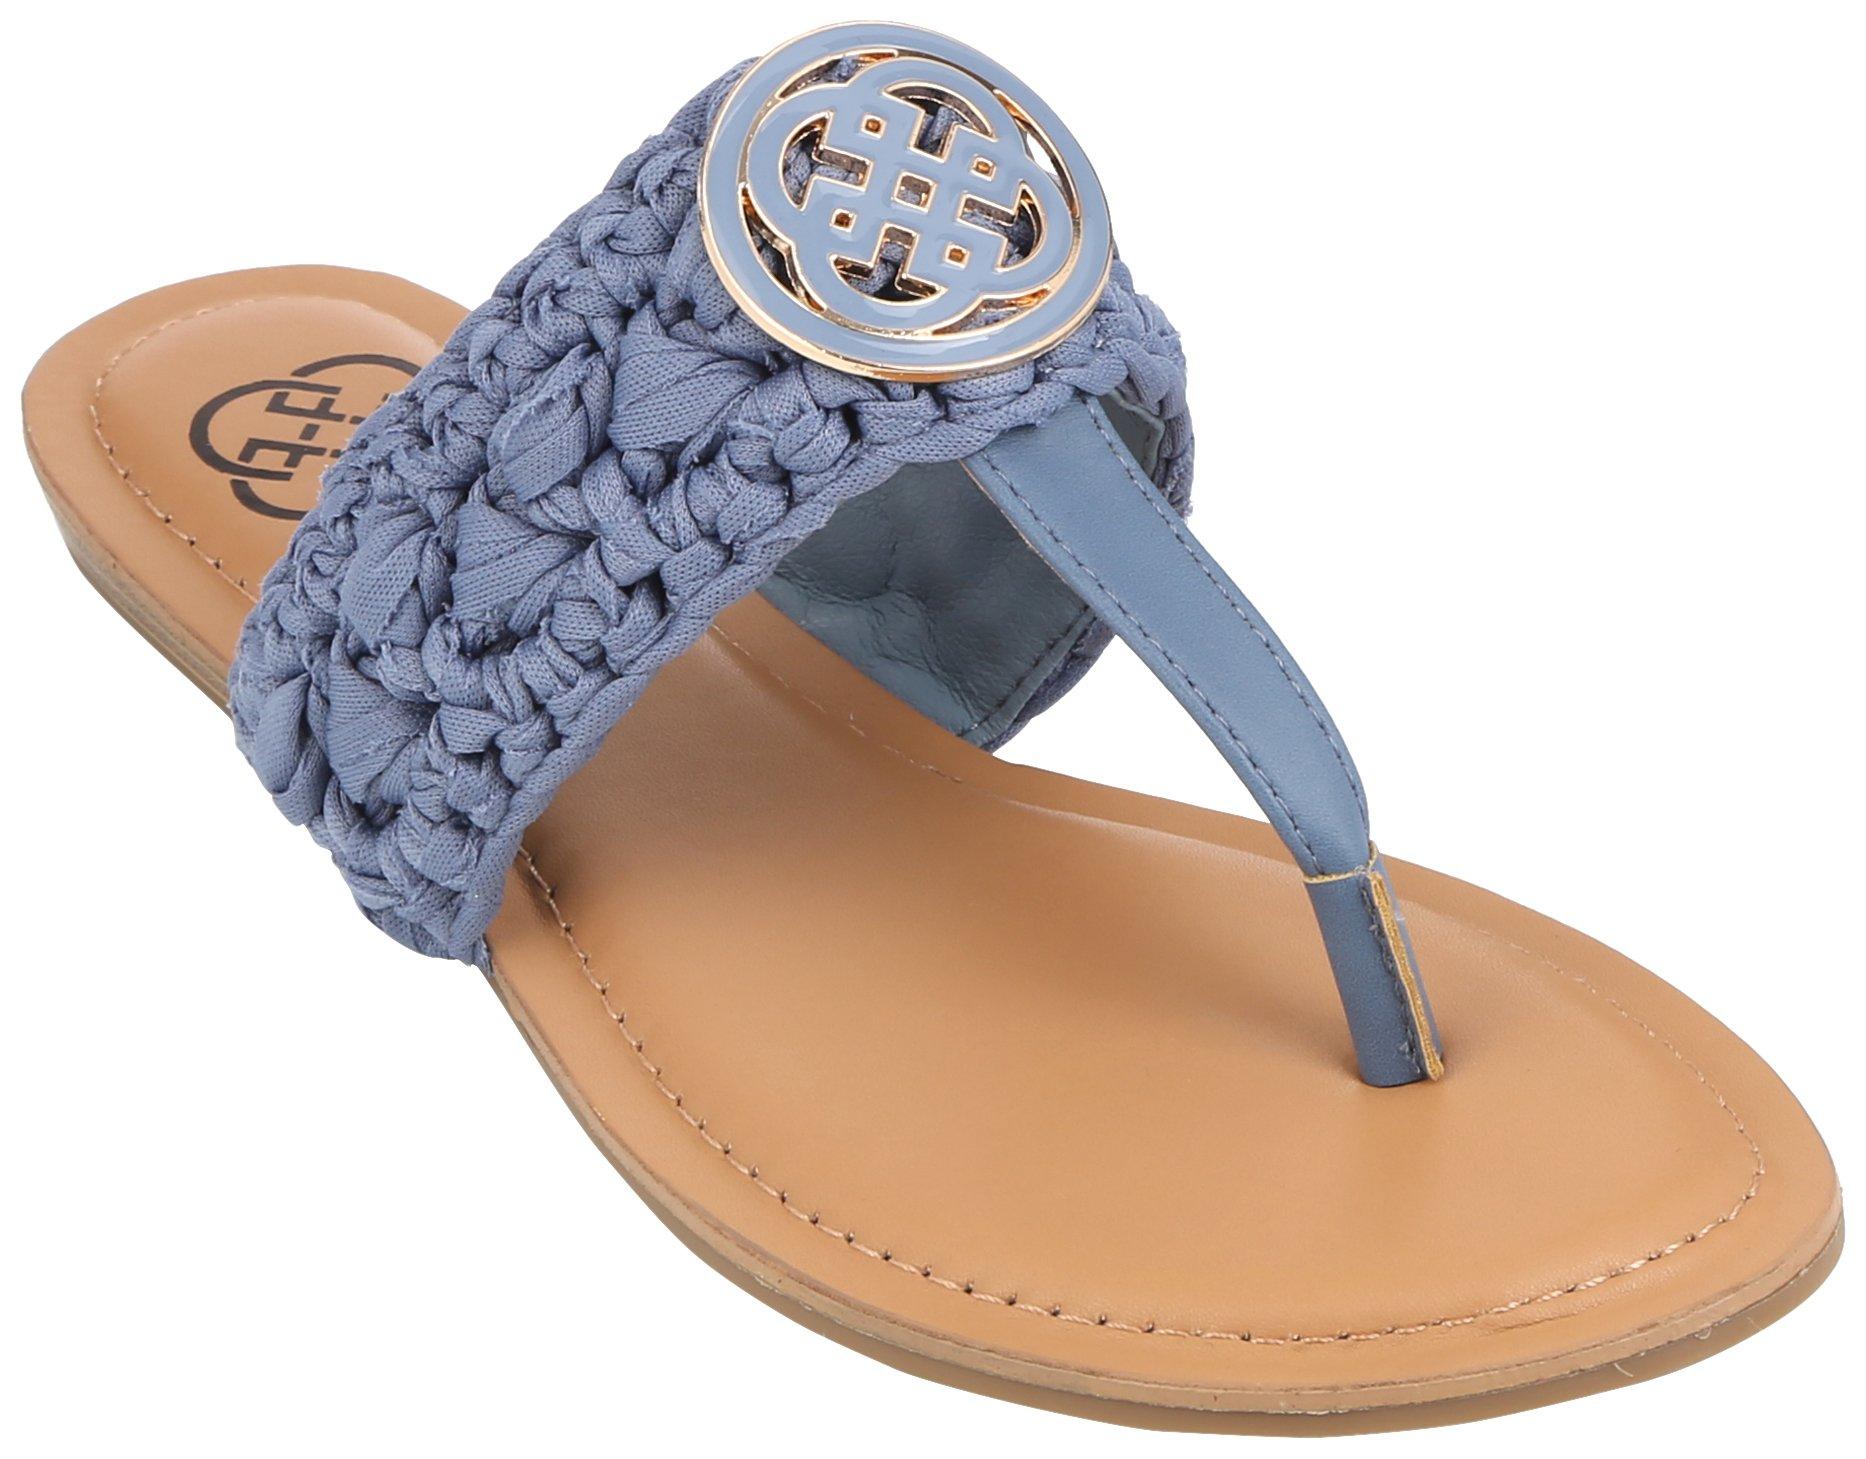 Daisy Fuentes Womens Penelope Sandals